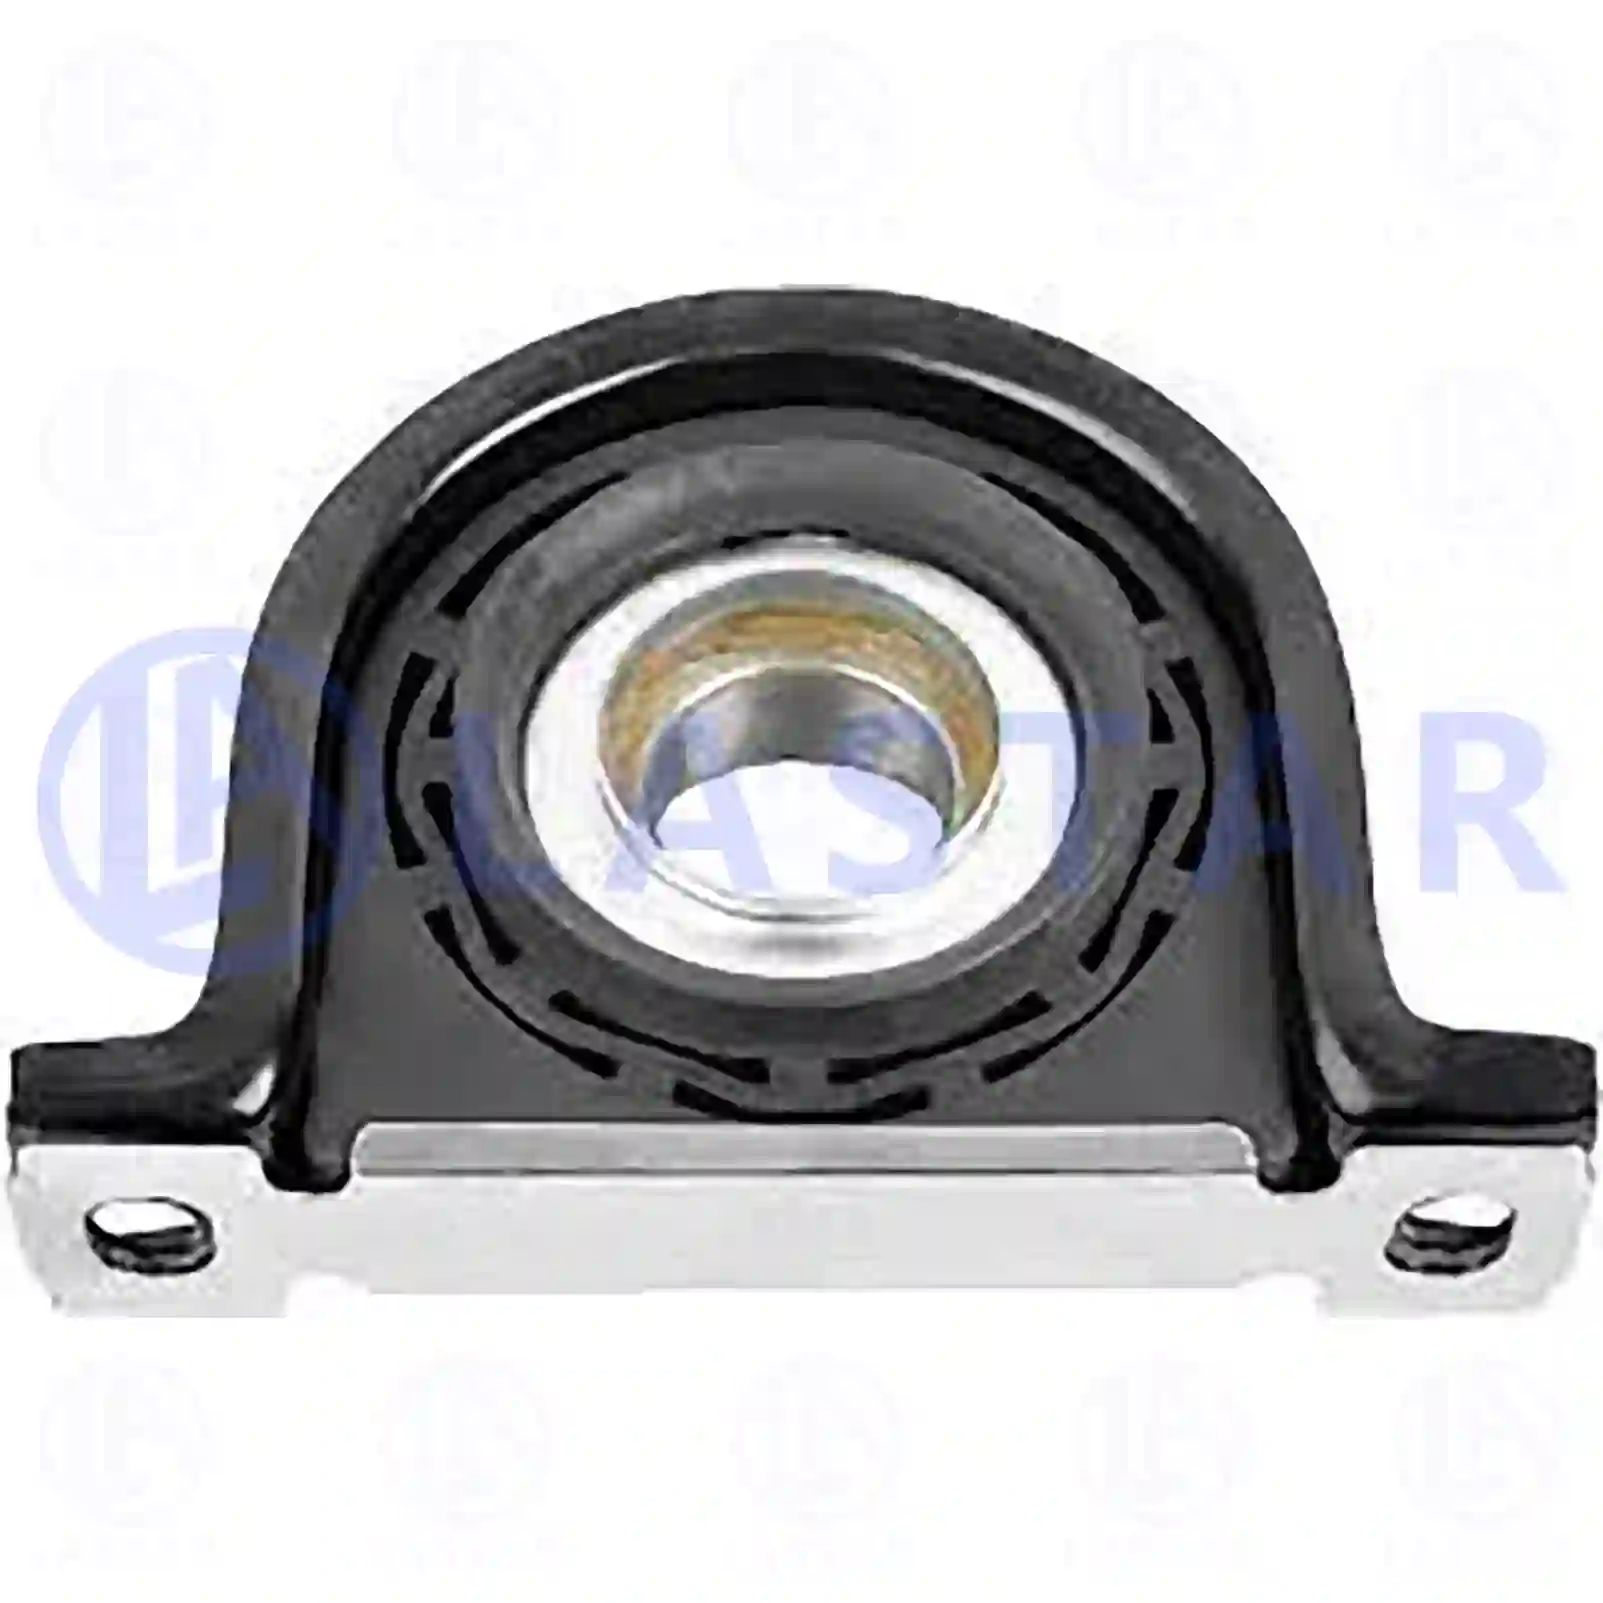 Center bearing, 77734348, 42536965, 9316022 ||  77734348 Lastar Spare Part | Truck Spare Parts, Auotomotive Spare Parts Center bearing, 77734348, 42536965, 9316022 ||  77734348 Lastar Spare Part | Truck Spare Parts, Auotomotive Spare Parts